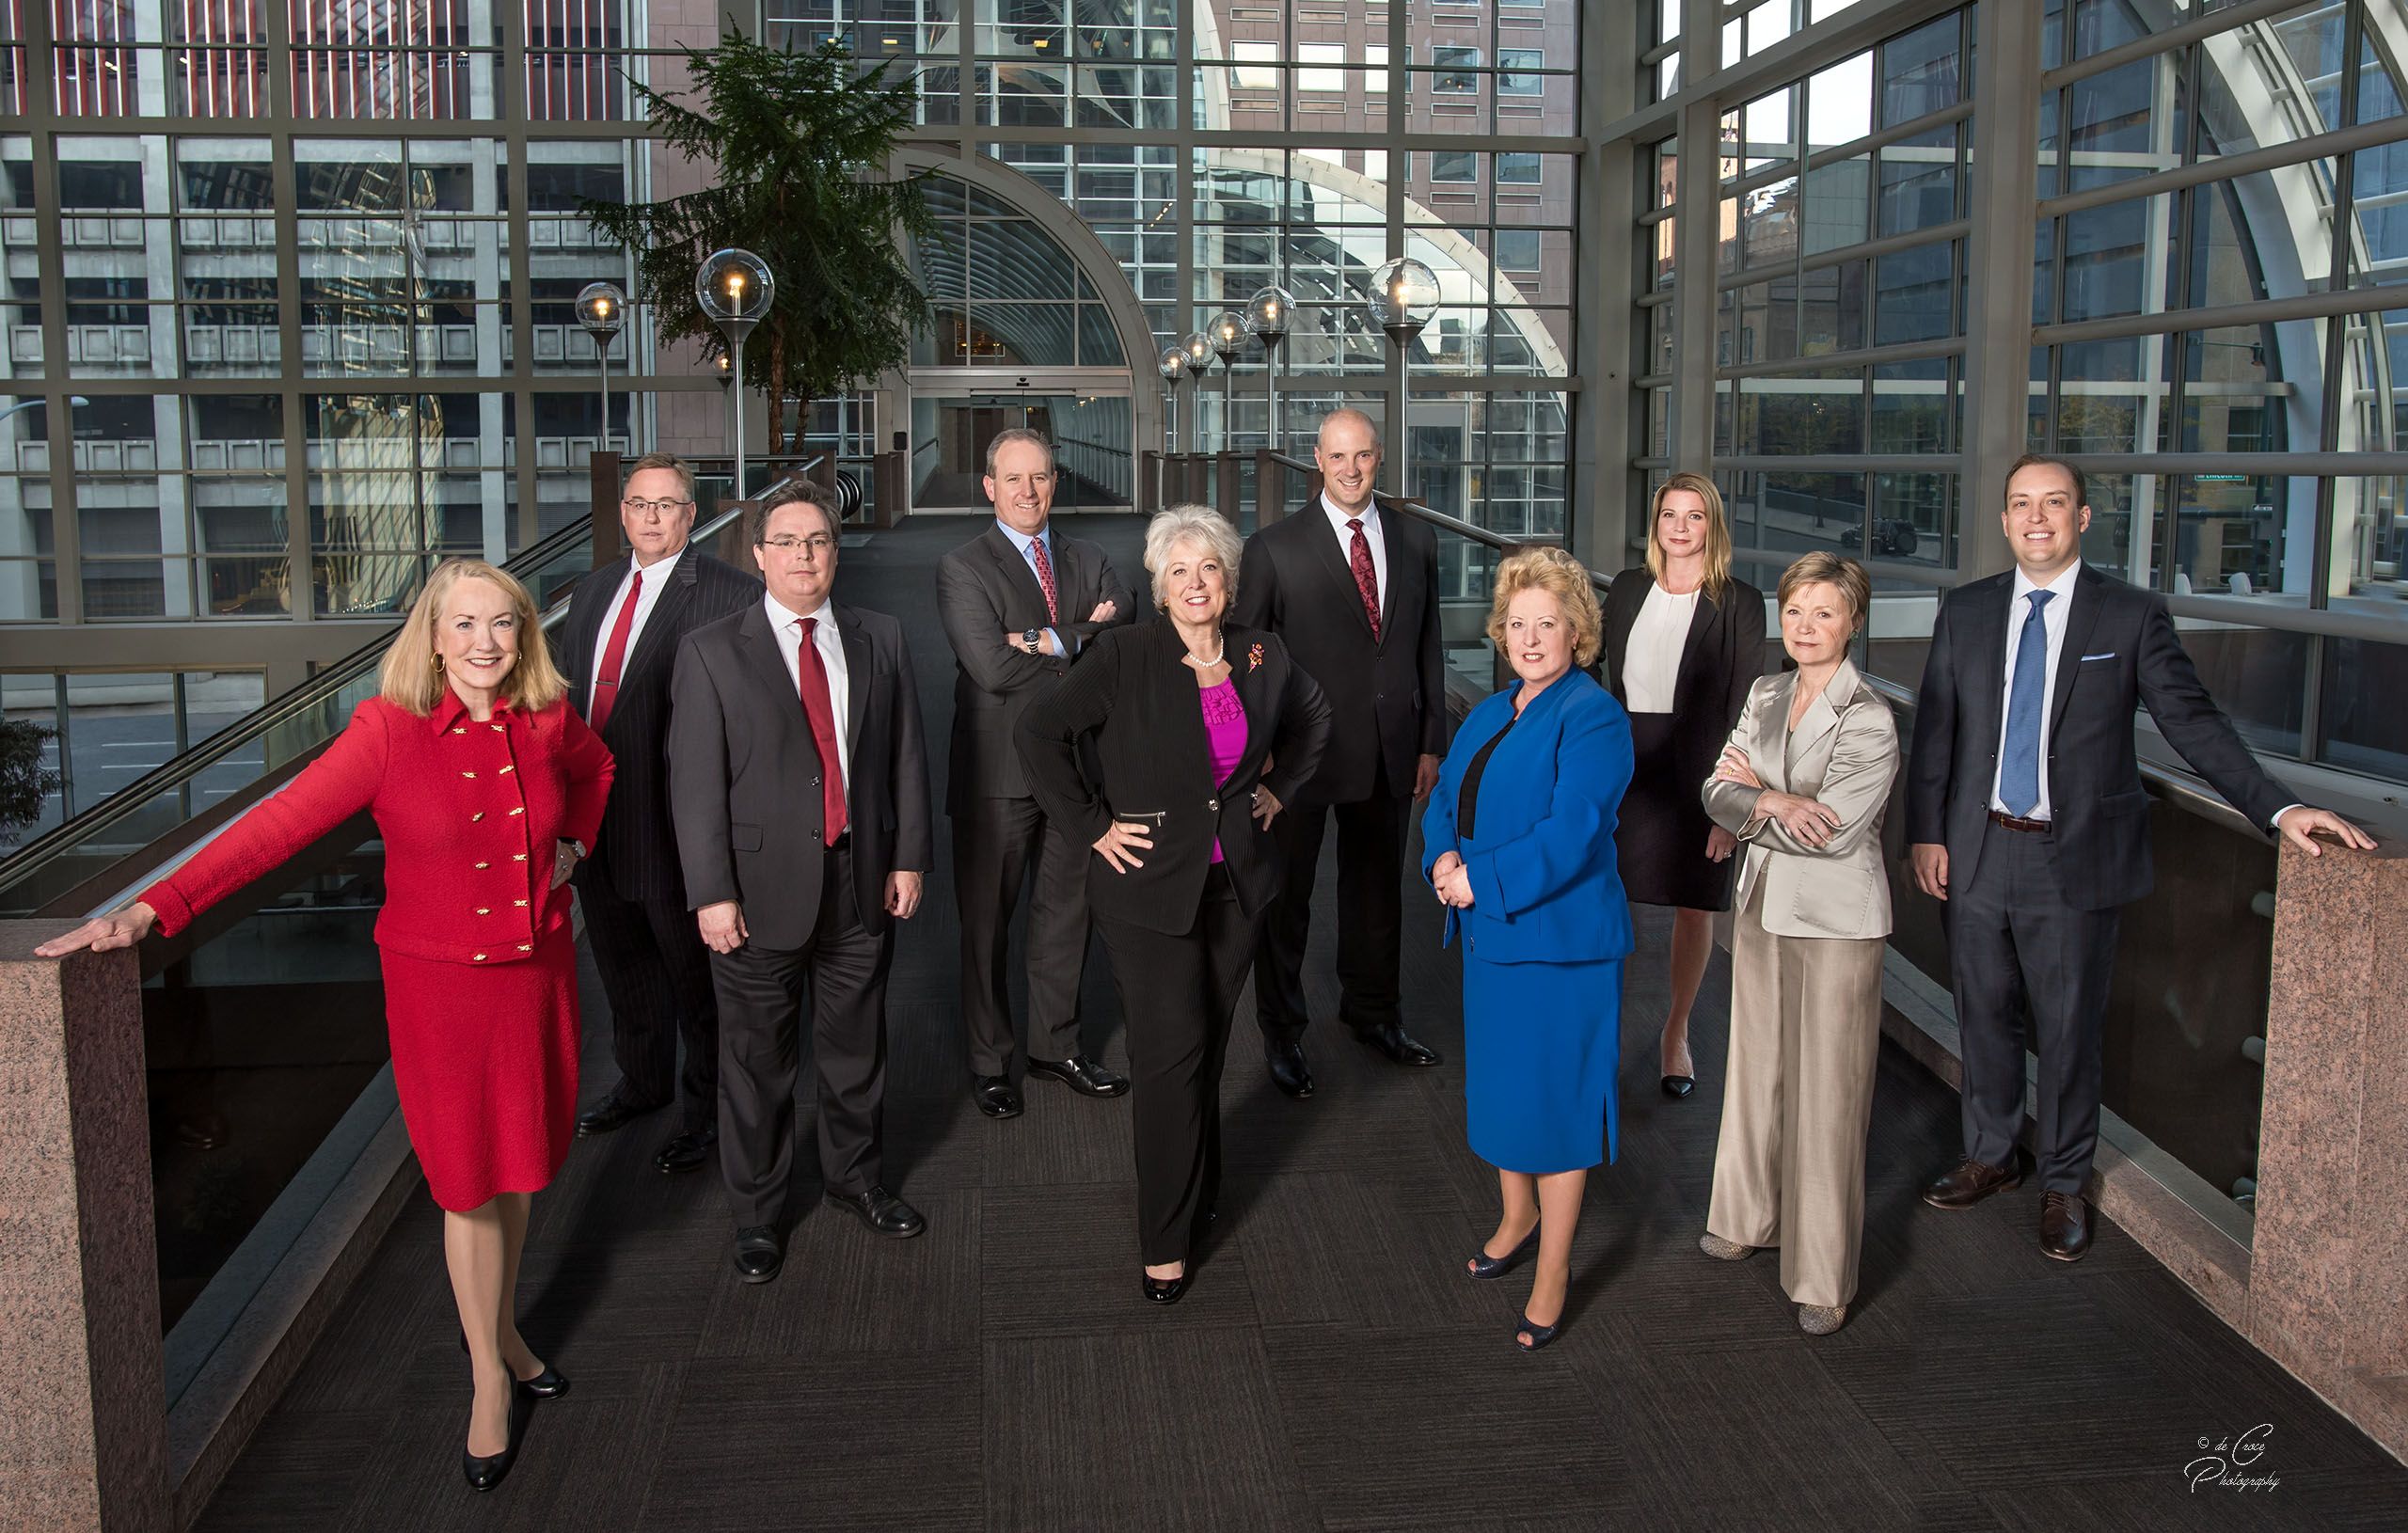 Attorney Firm Group Photography.jpg